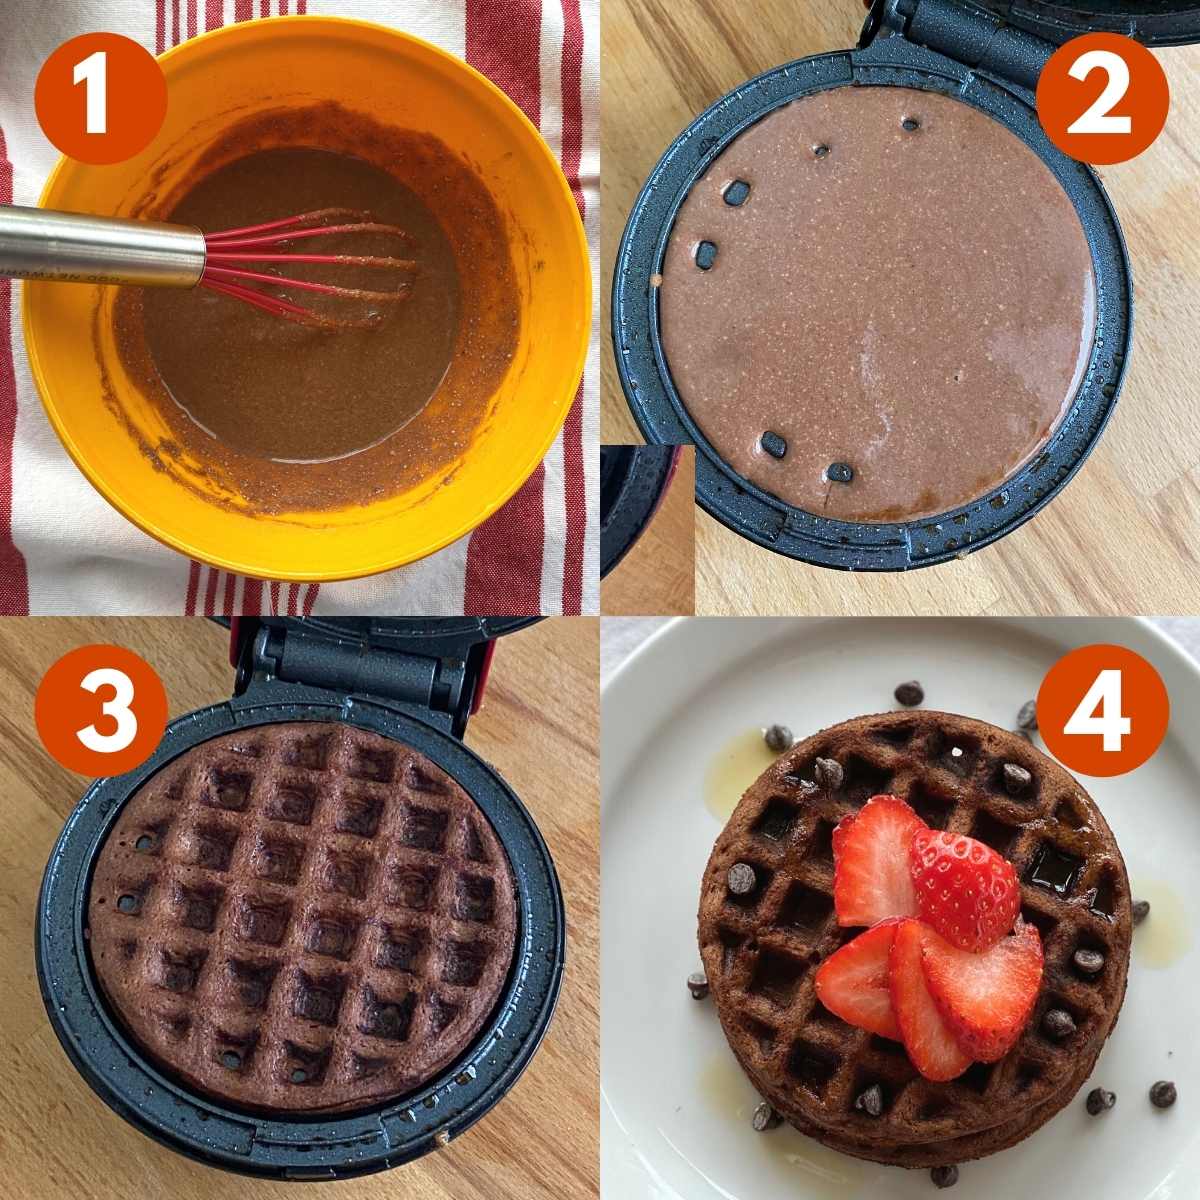 Numbered collage of pictures to make the recipe. 1-Batter in bowl. 2-Uncooked batter in Dash. 3-Cooked batter in waffle maker. 4-chocolate chaffle on plate.